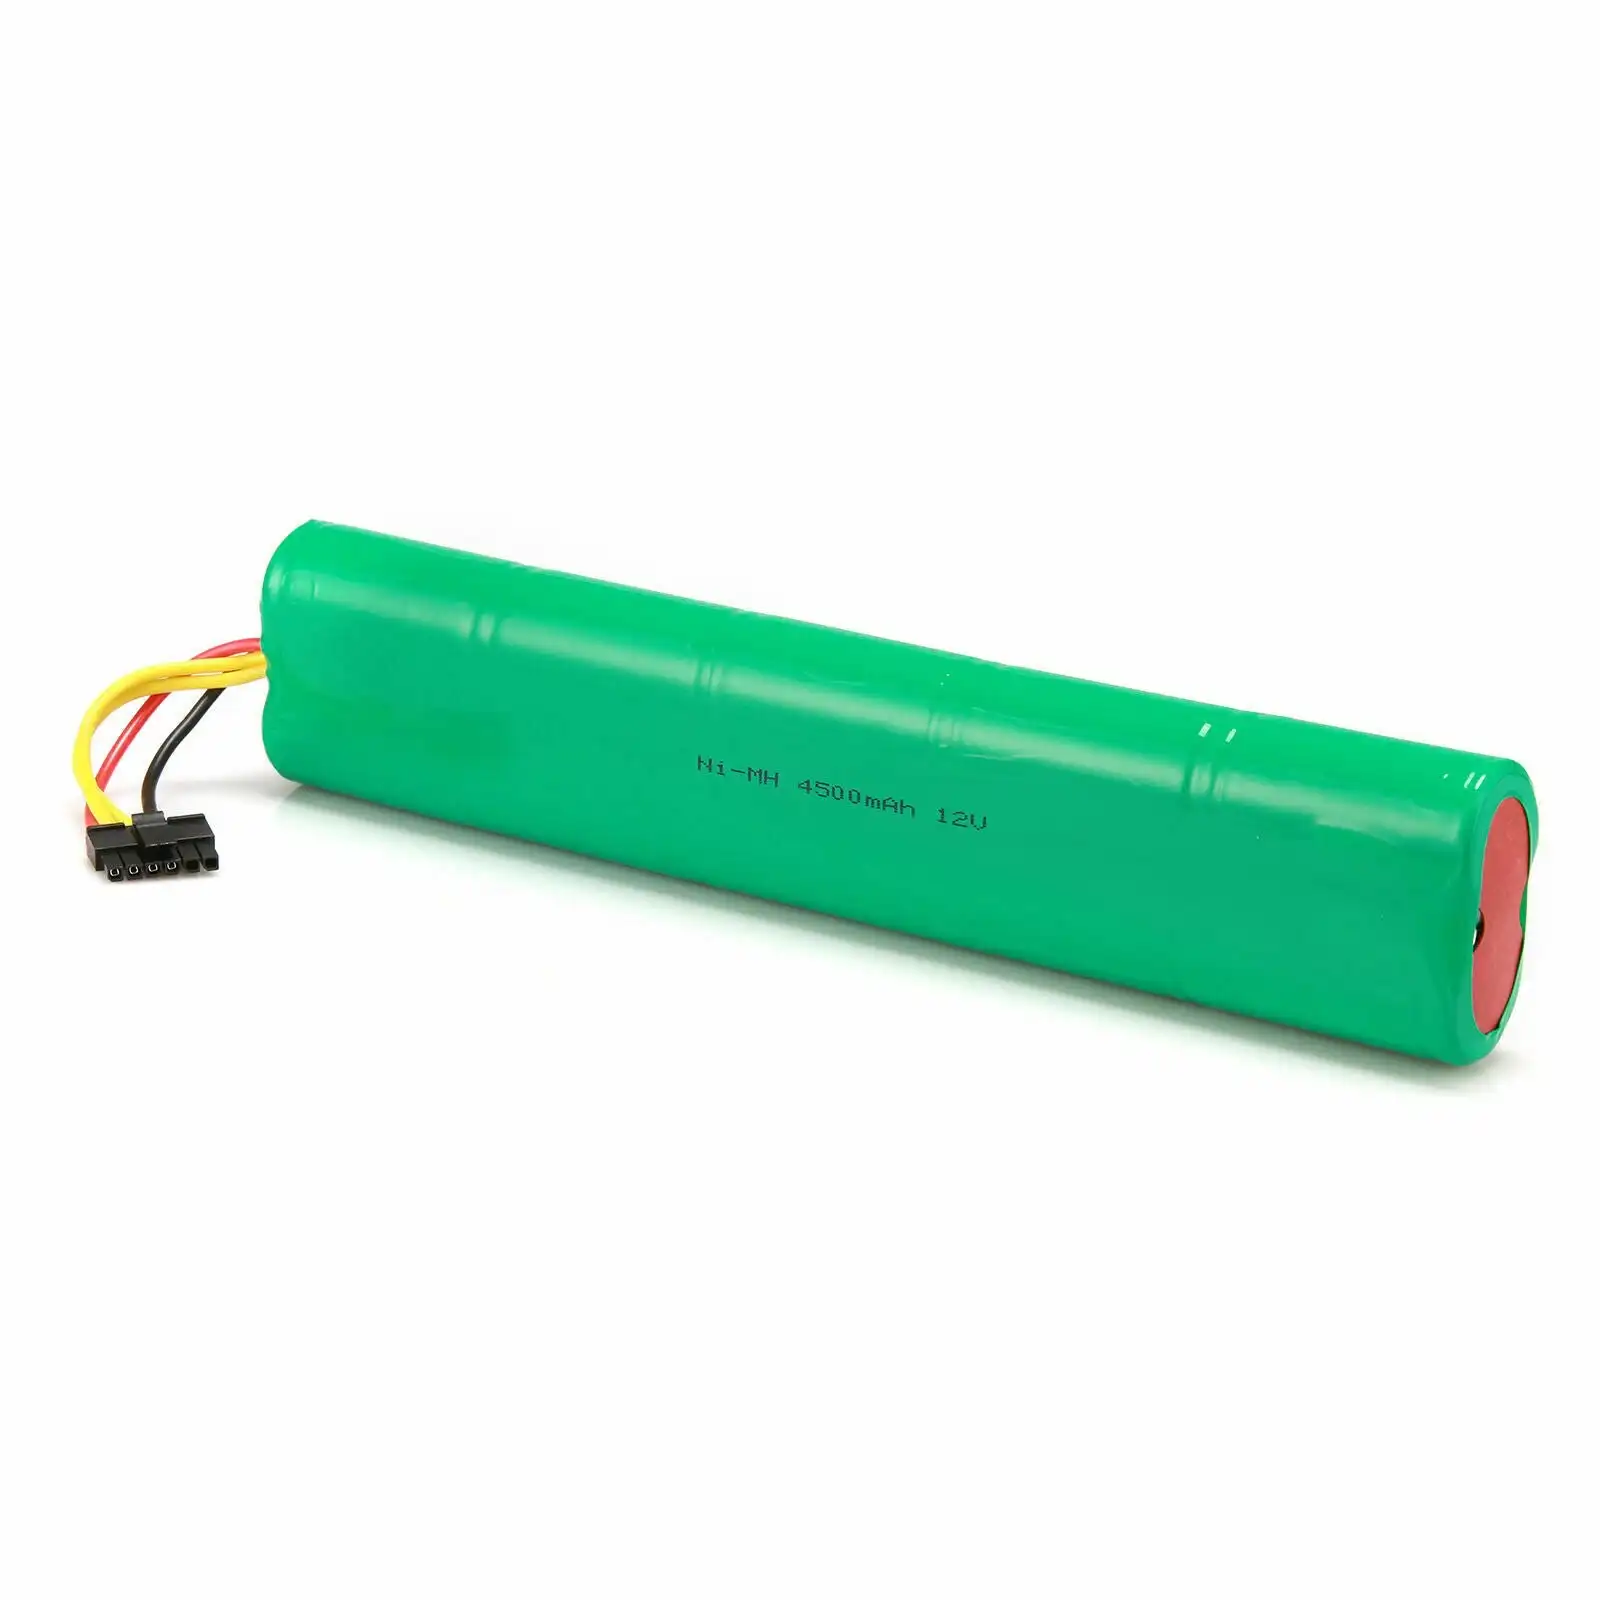 4500mAH 12V Compatible Battery for Neato Botvac 70e 75 80 85 D75 D85 Robot Vacuum Cleaner